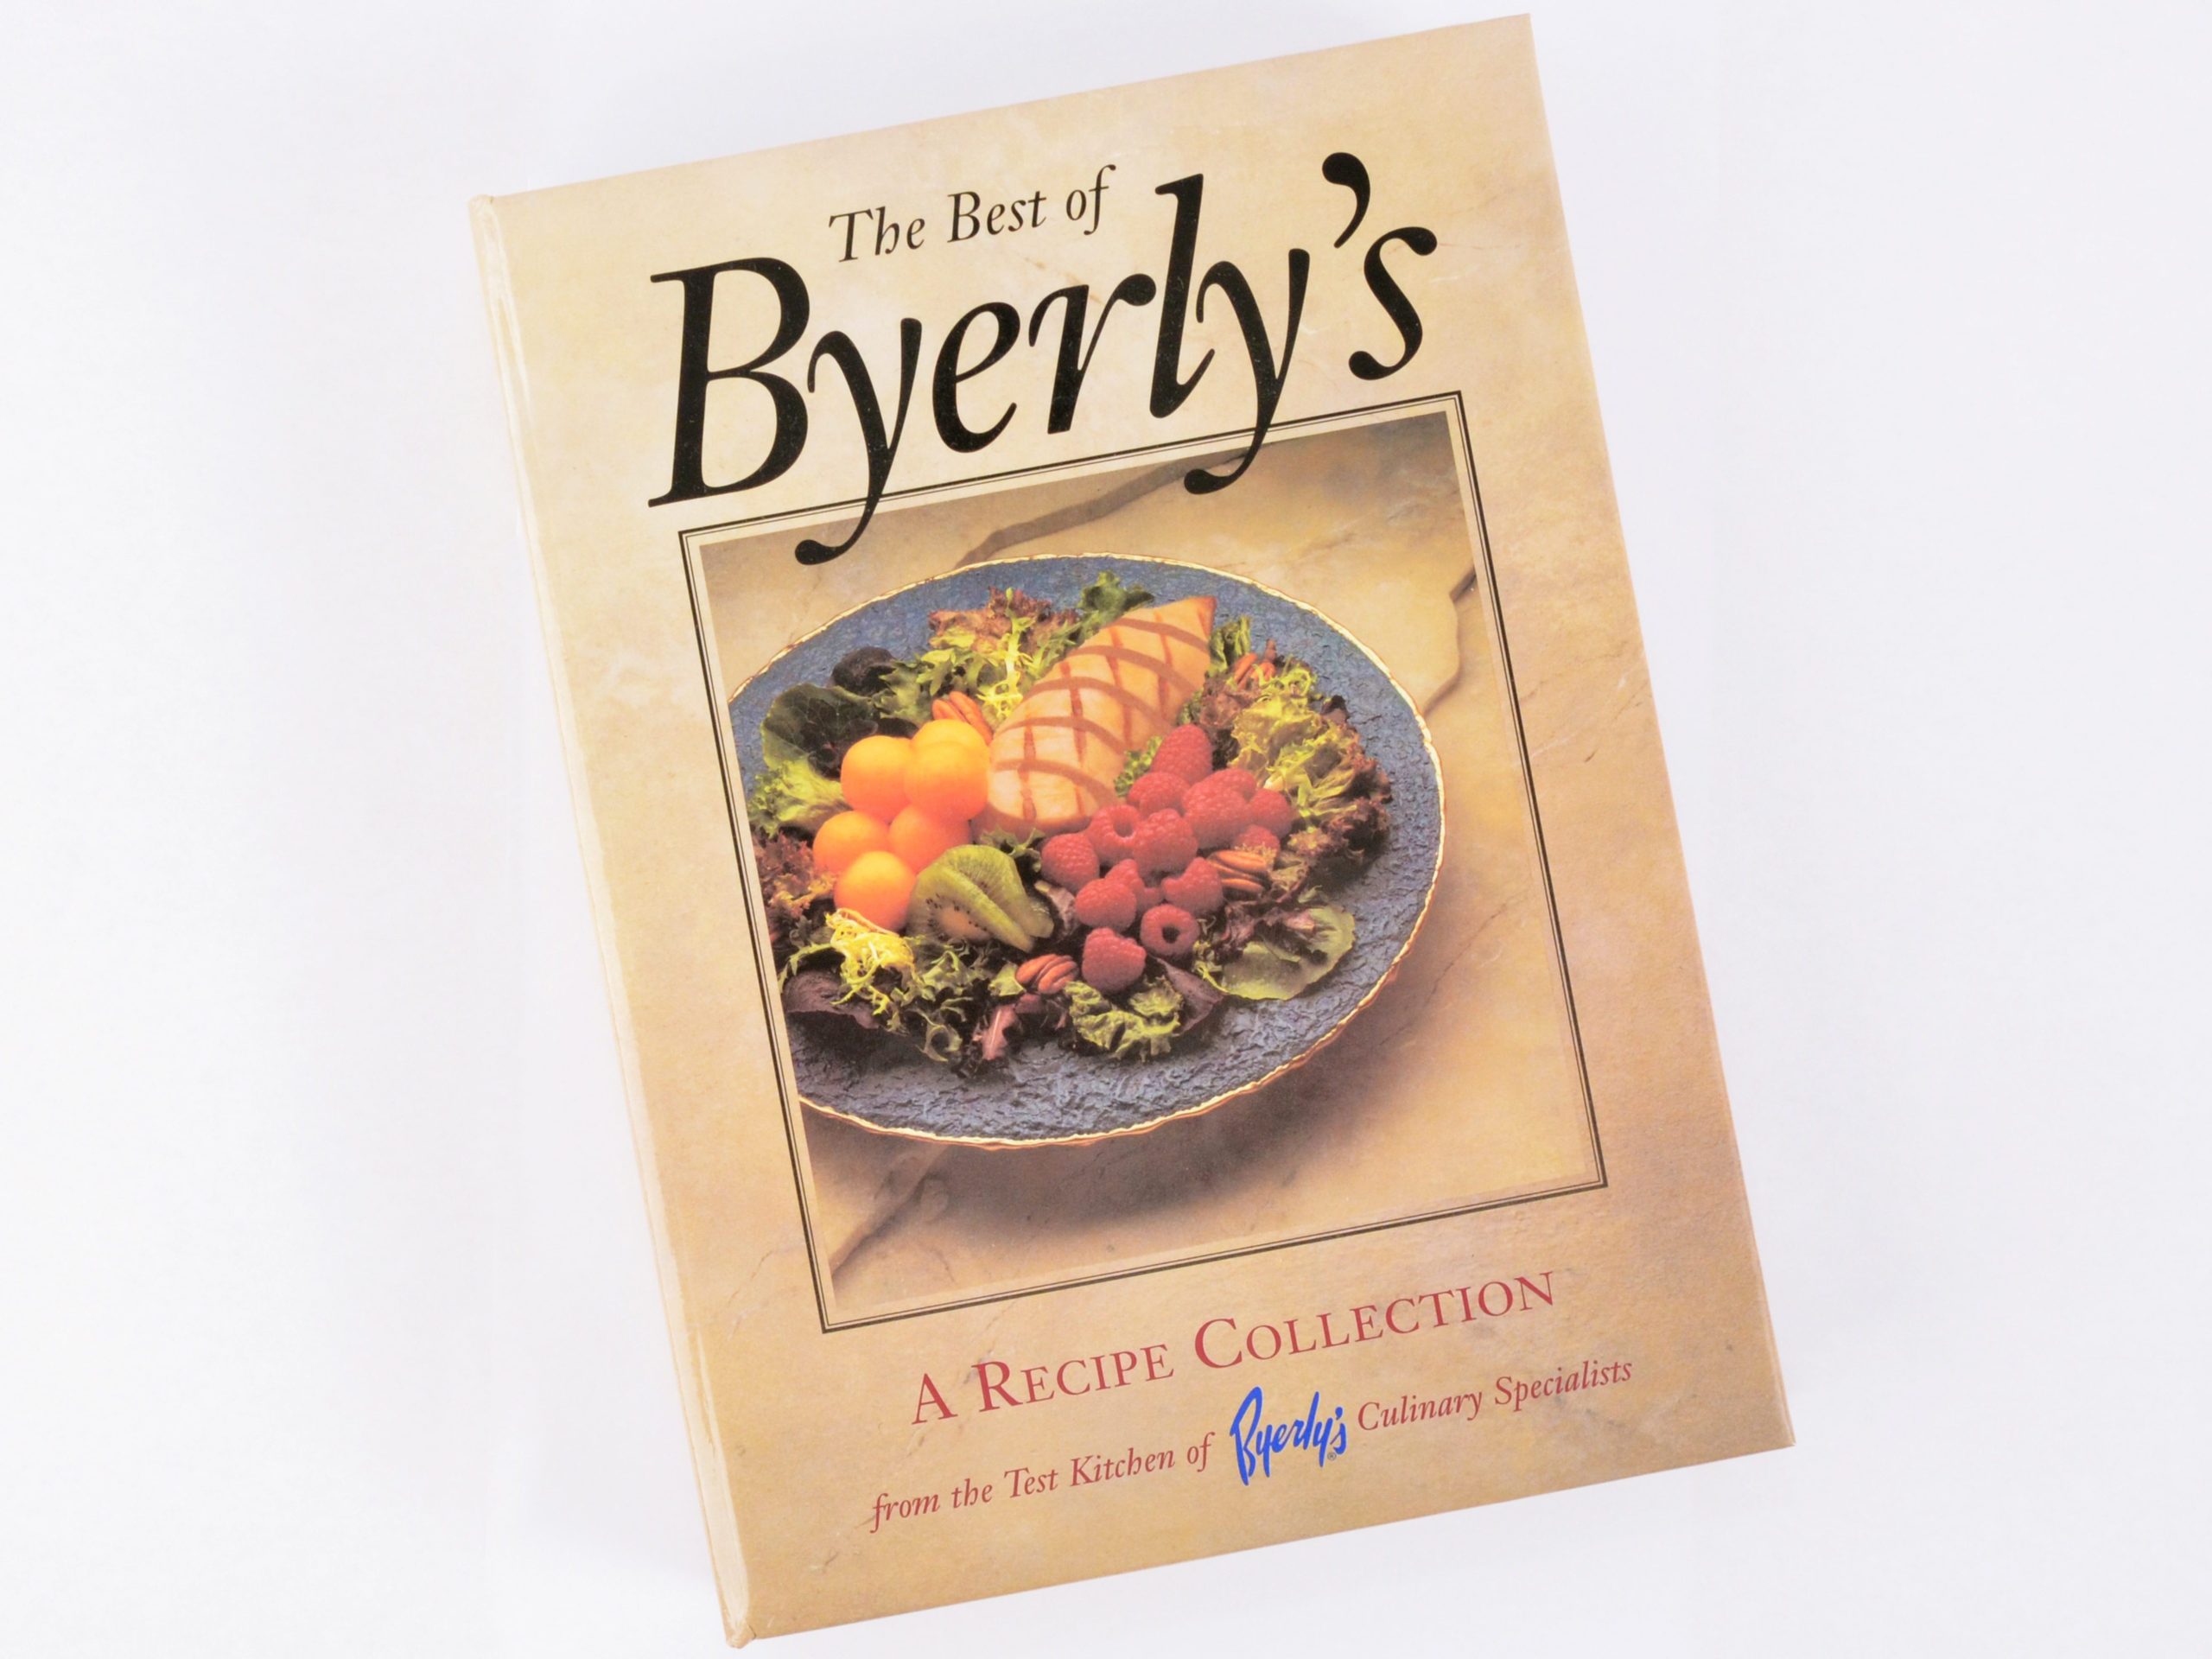 Best of Byerly’s cookbook